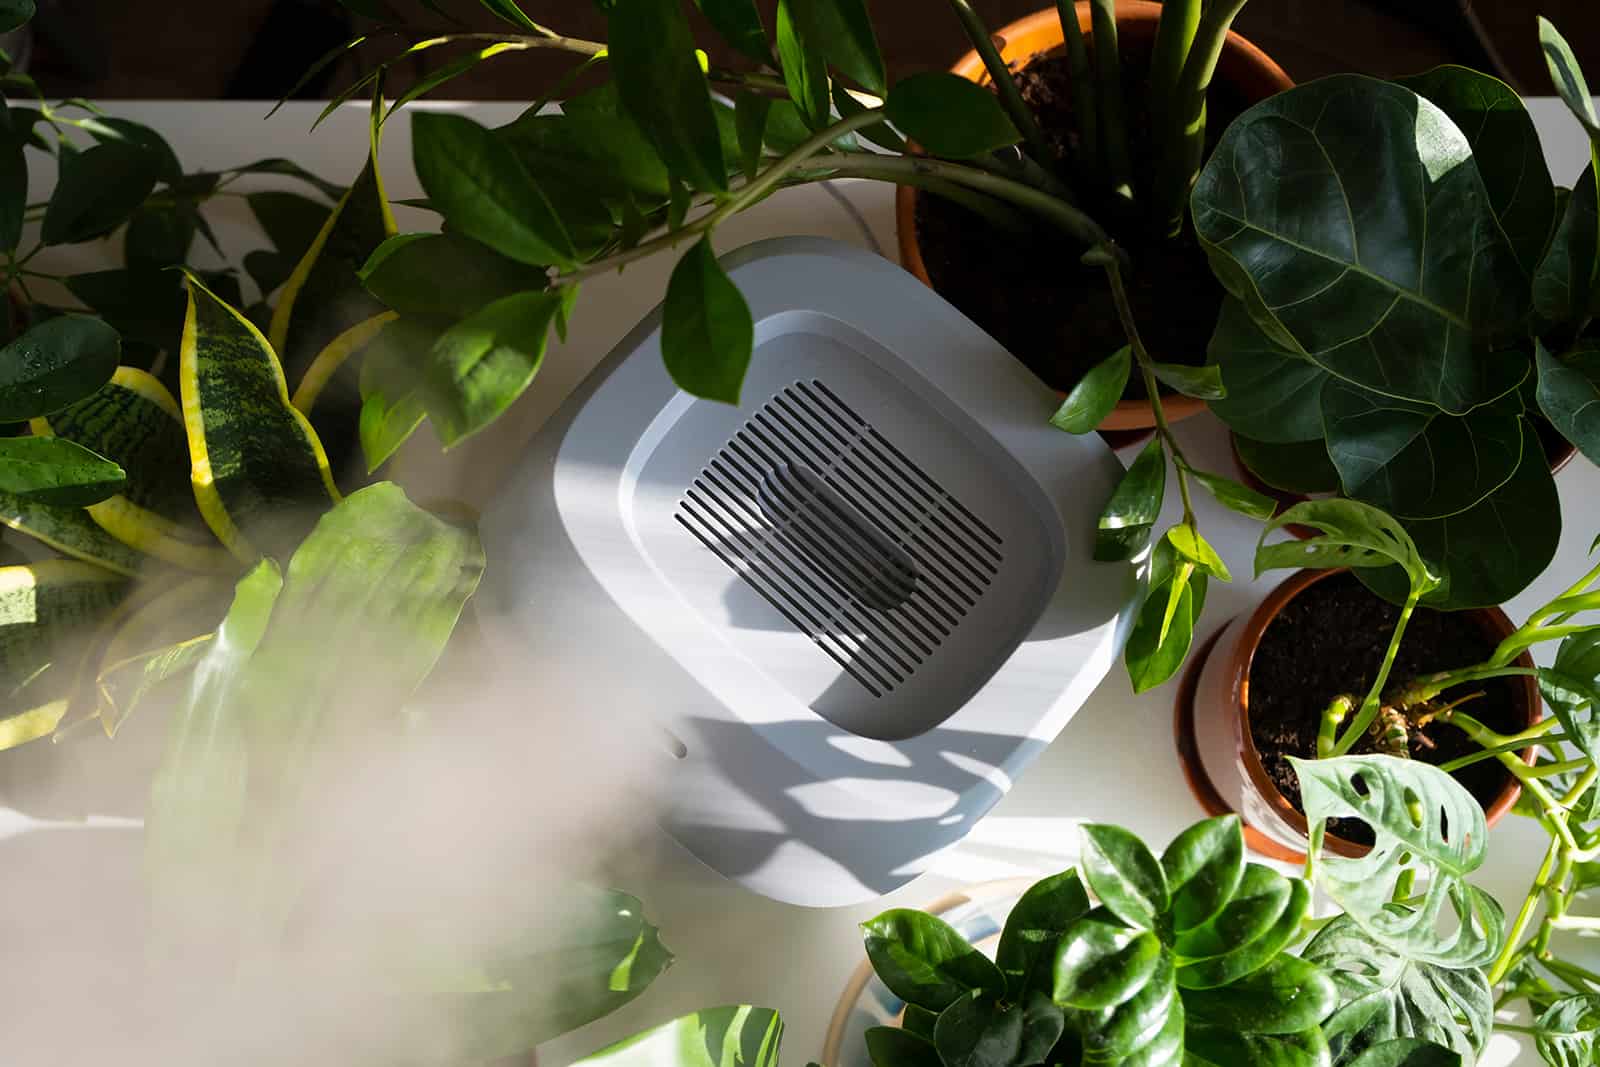 humidifier spreading steam among indoor plants